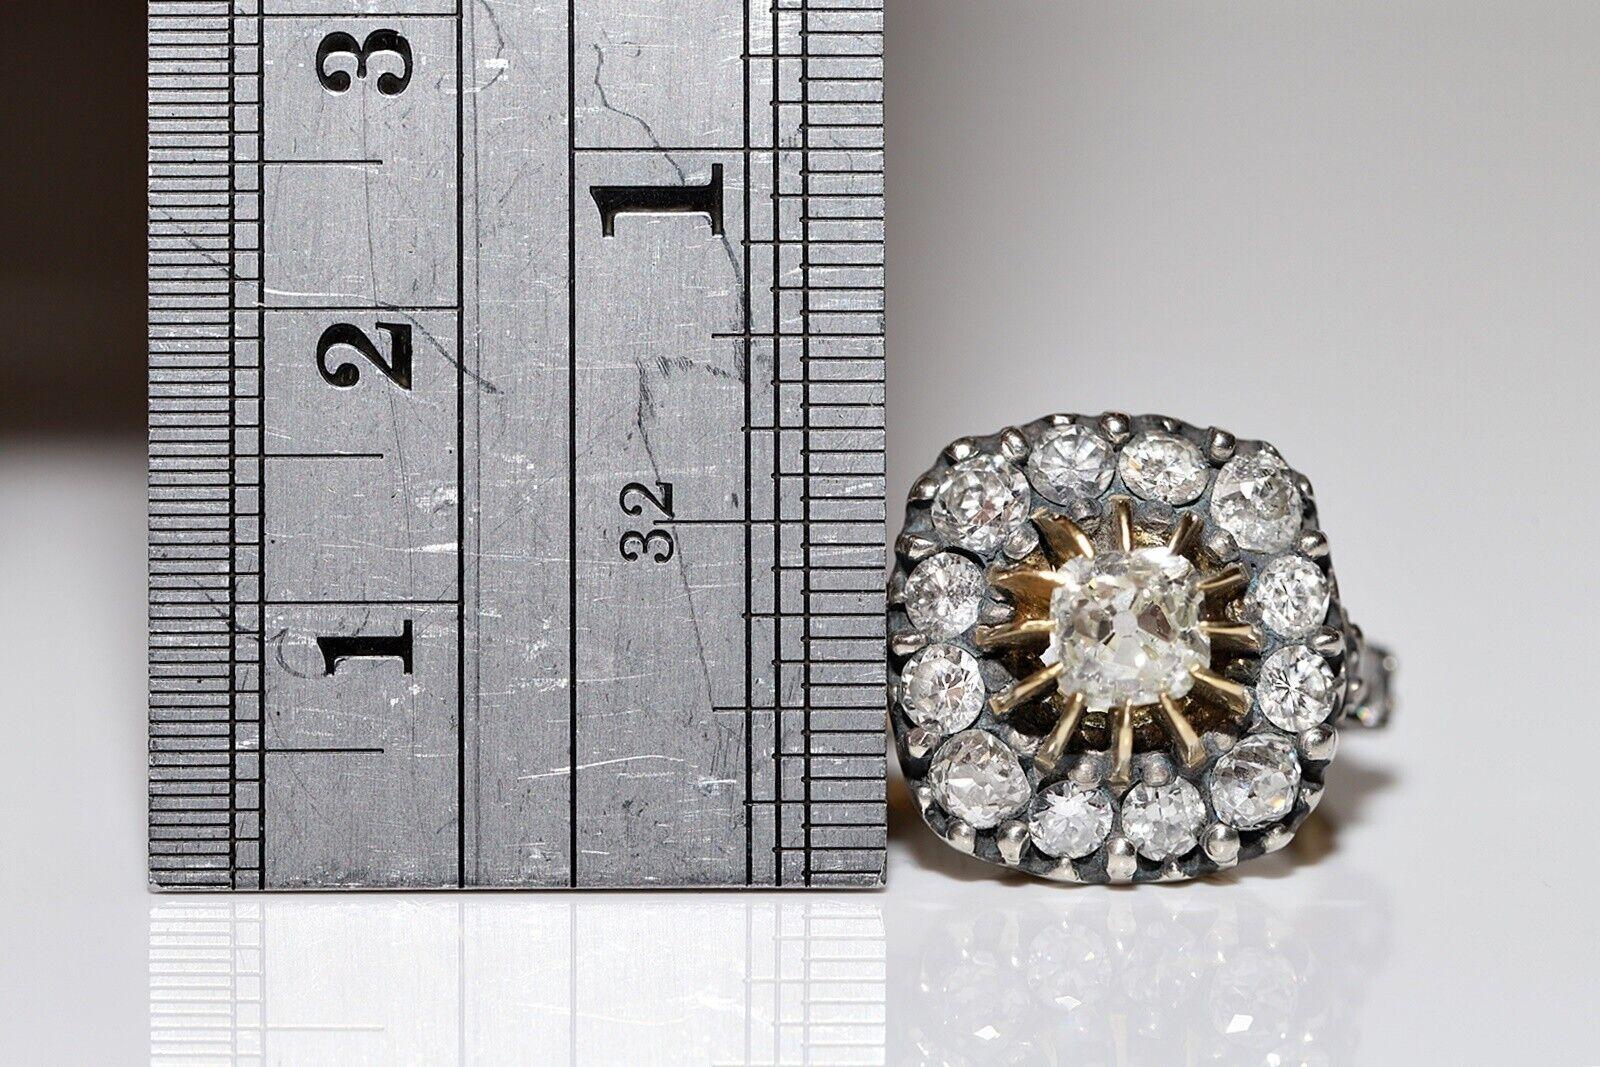 In very good condition.
Total weight is 7.5 grams.
 Center Old Cut diamond 0.89 carat.
Totally is all diamond  3.26 carat.
The diamond is has G-H color S1-S2 clarity.
Ring size is US 6.75 
We can make any size.
Box is not included.
Please contact